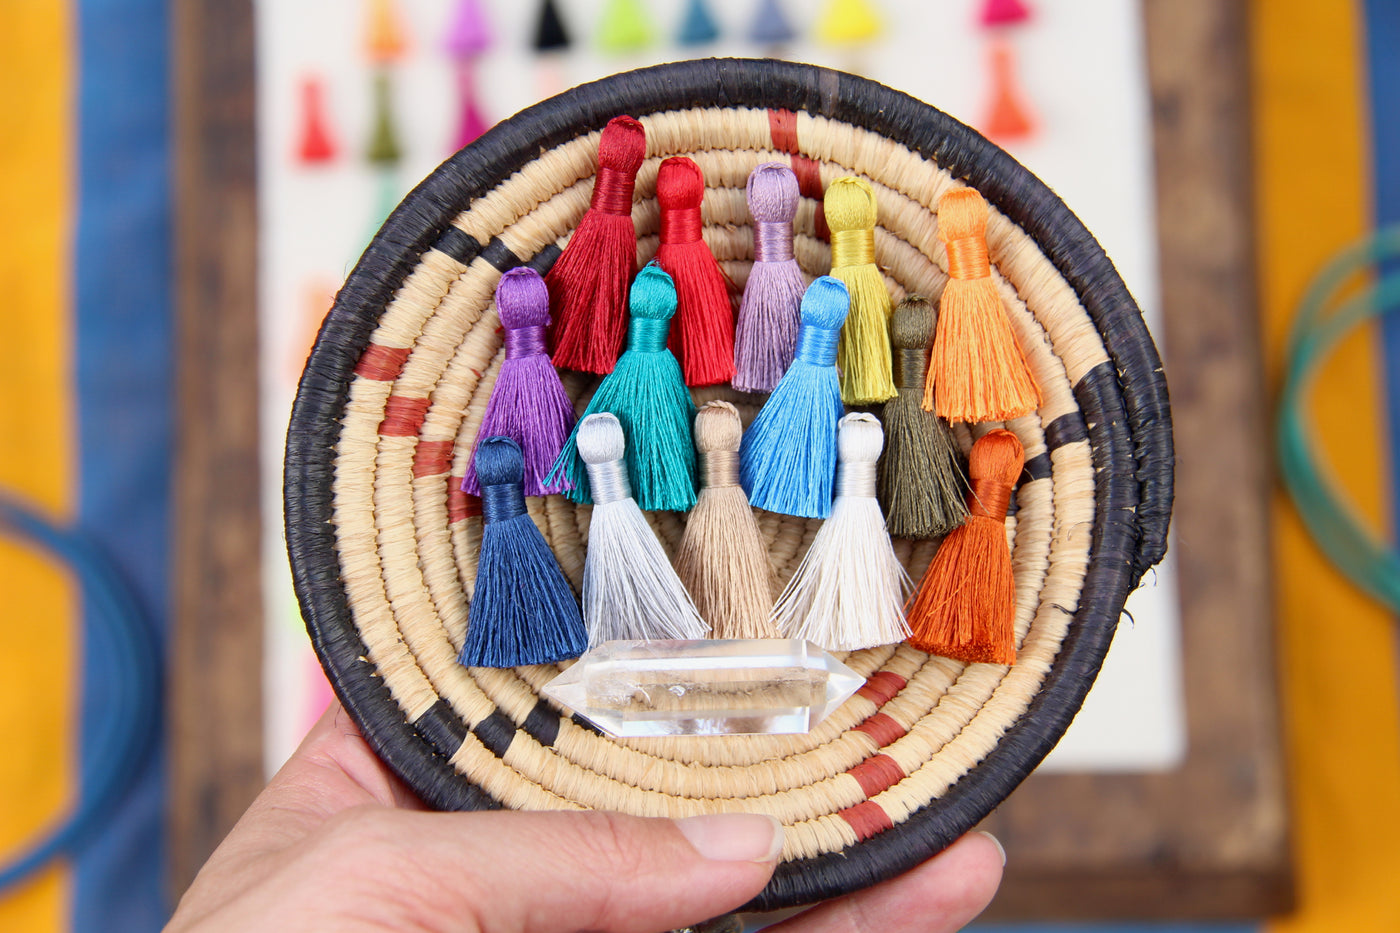 Handmade, Fairtrade tassels For Making Jewelry, With Loop at the Top